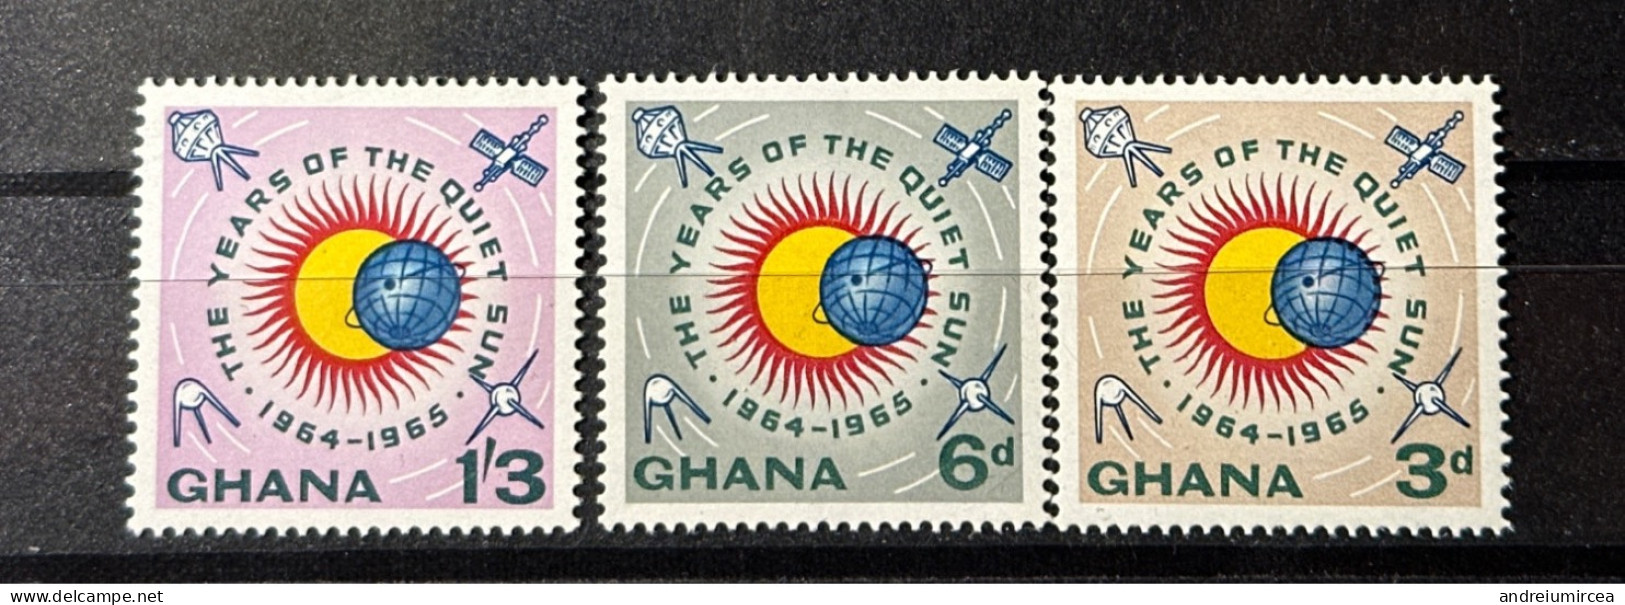 Ghana MNH  The Years Of The Quiet Sun 1964-1965 - Afrique